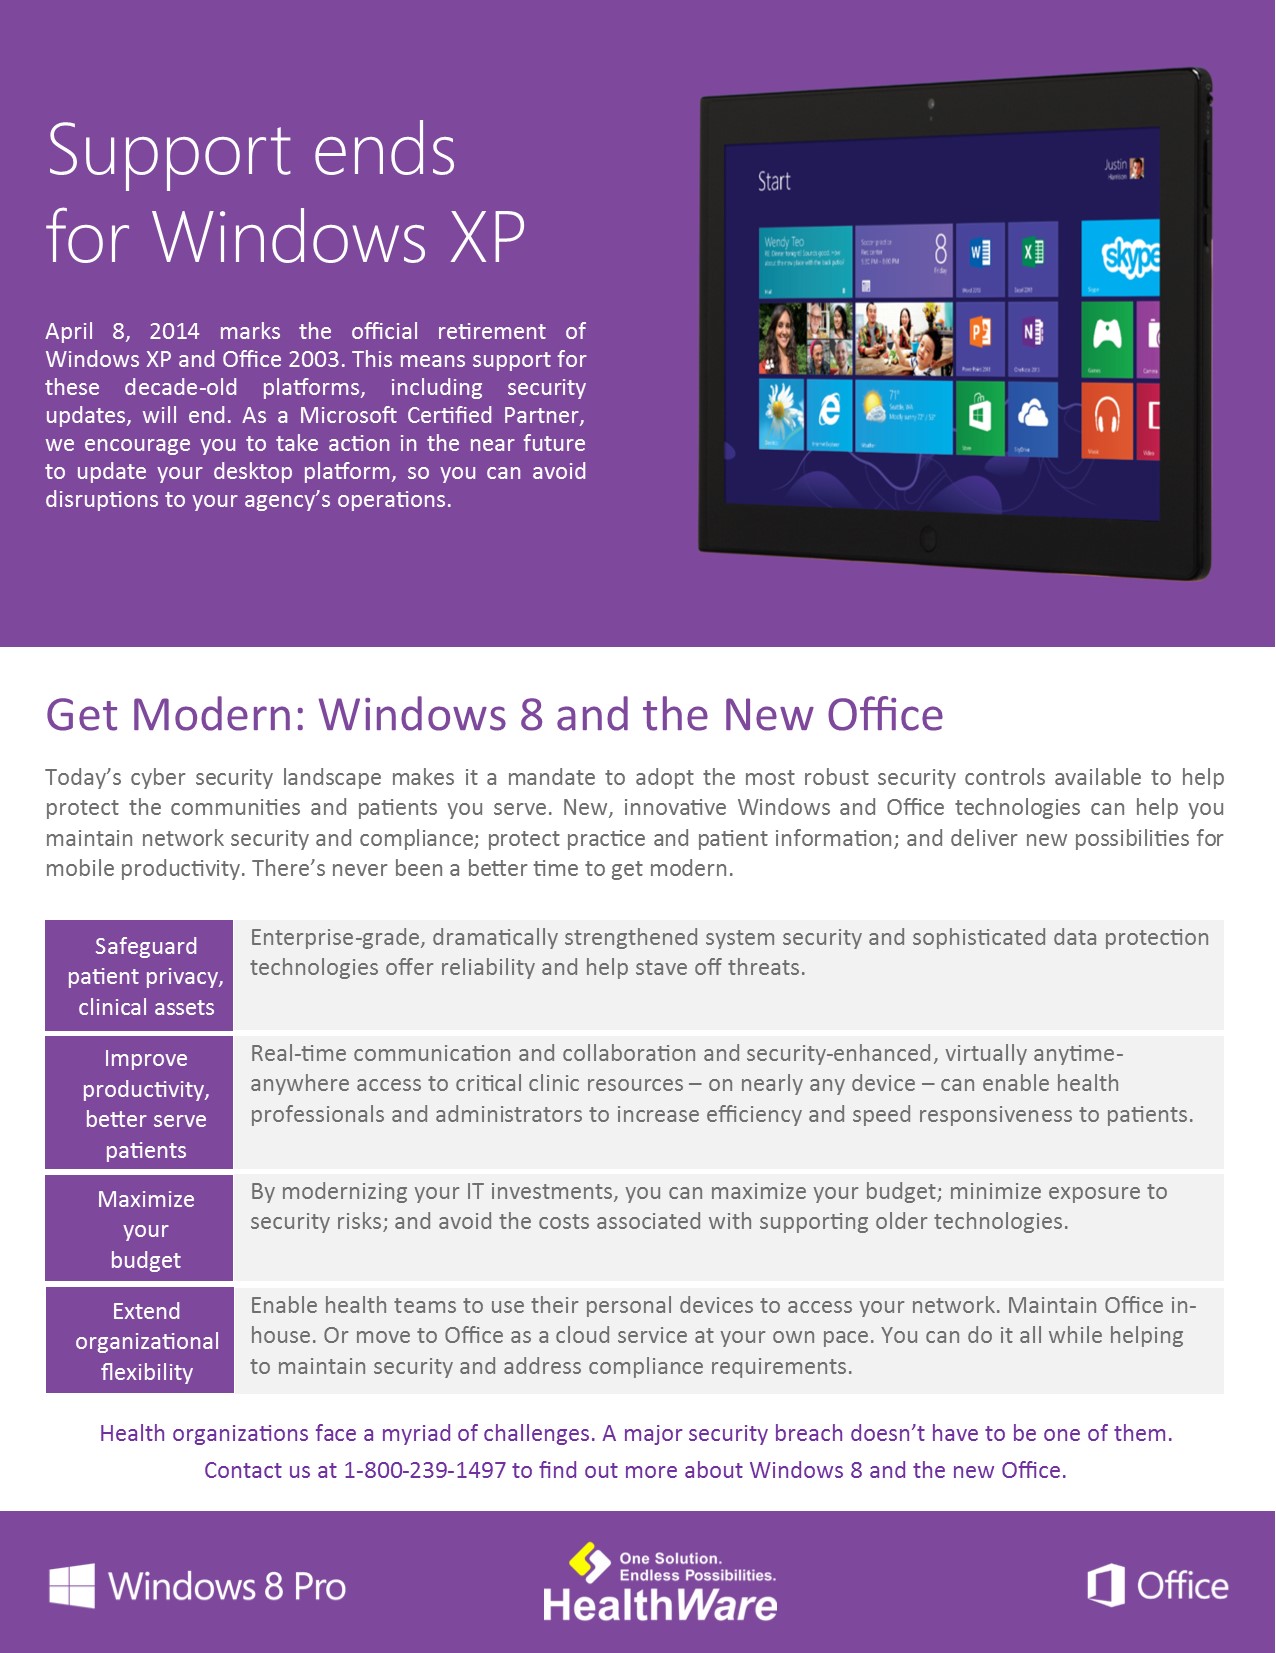 Support ends for Windows XP; Contact us now for more information on getting modern with Windows 8 and the New Office